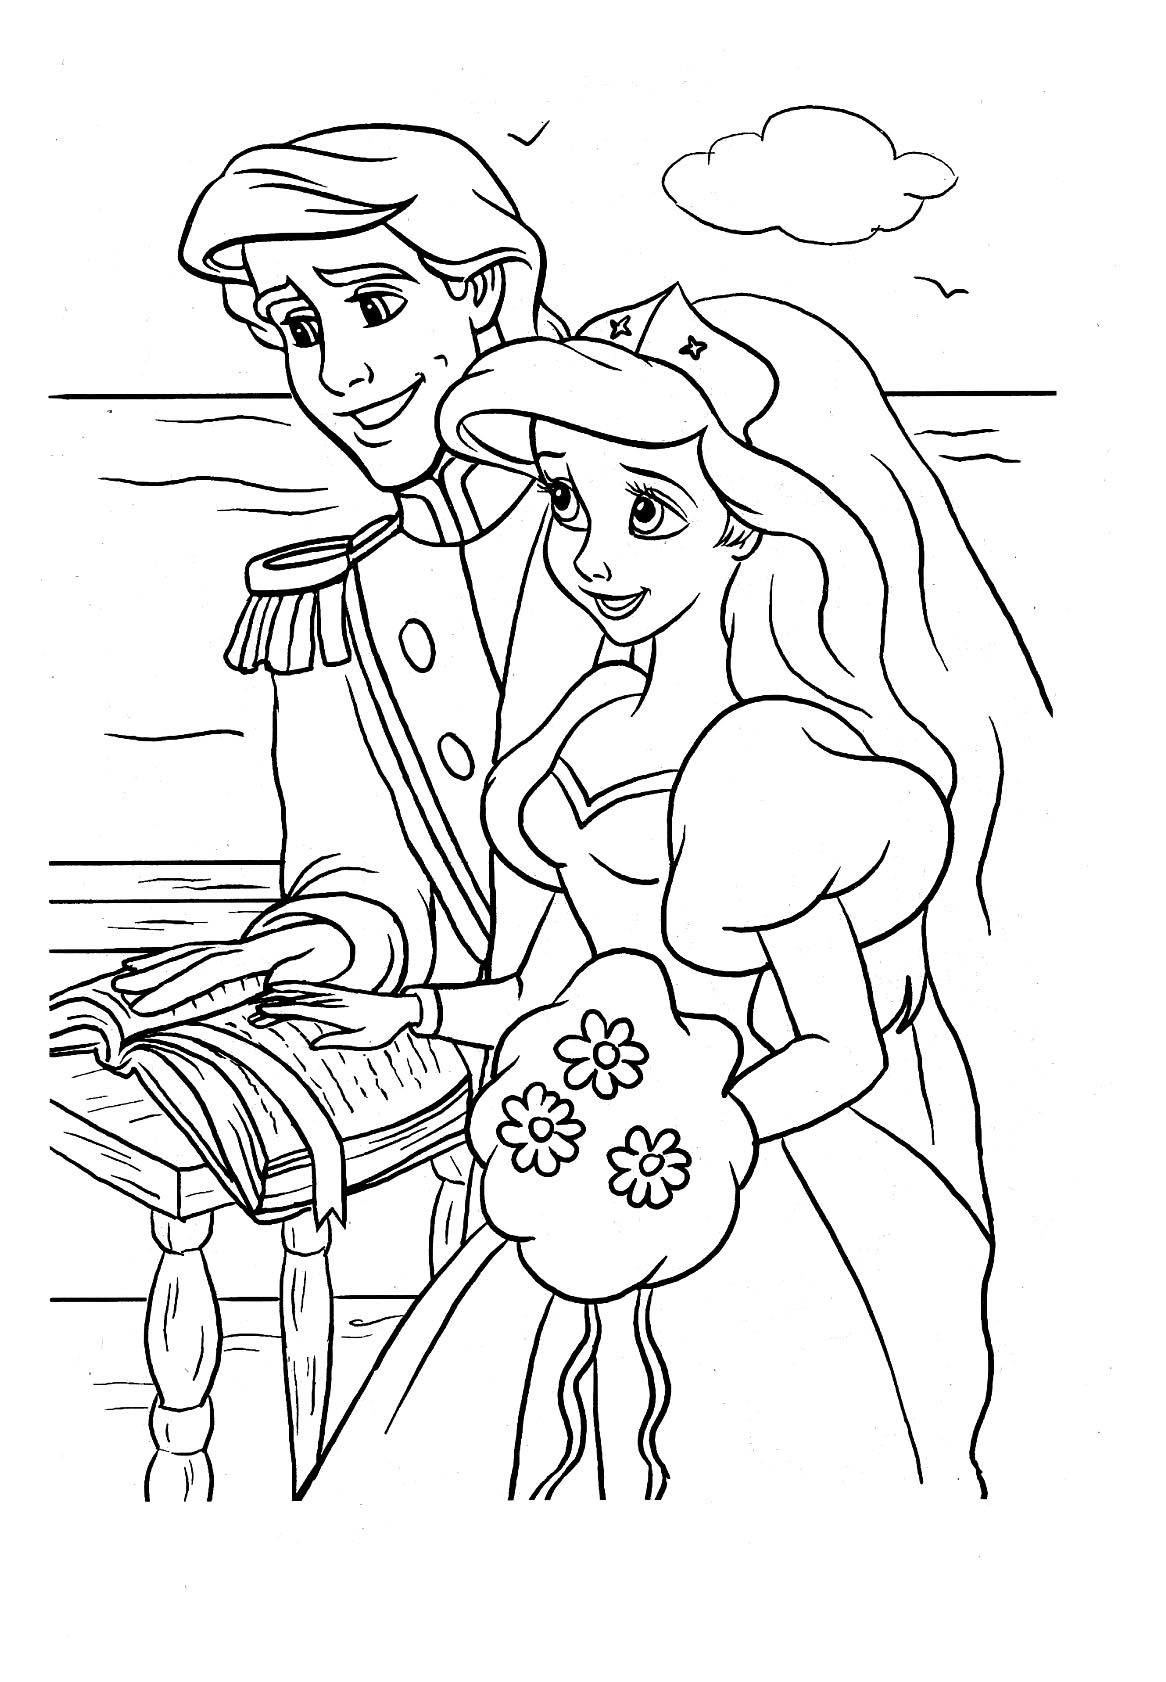 Human Ariel And Prince Eric coloring page